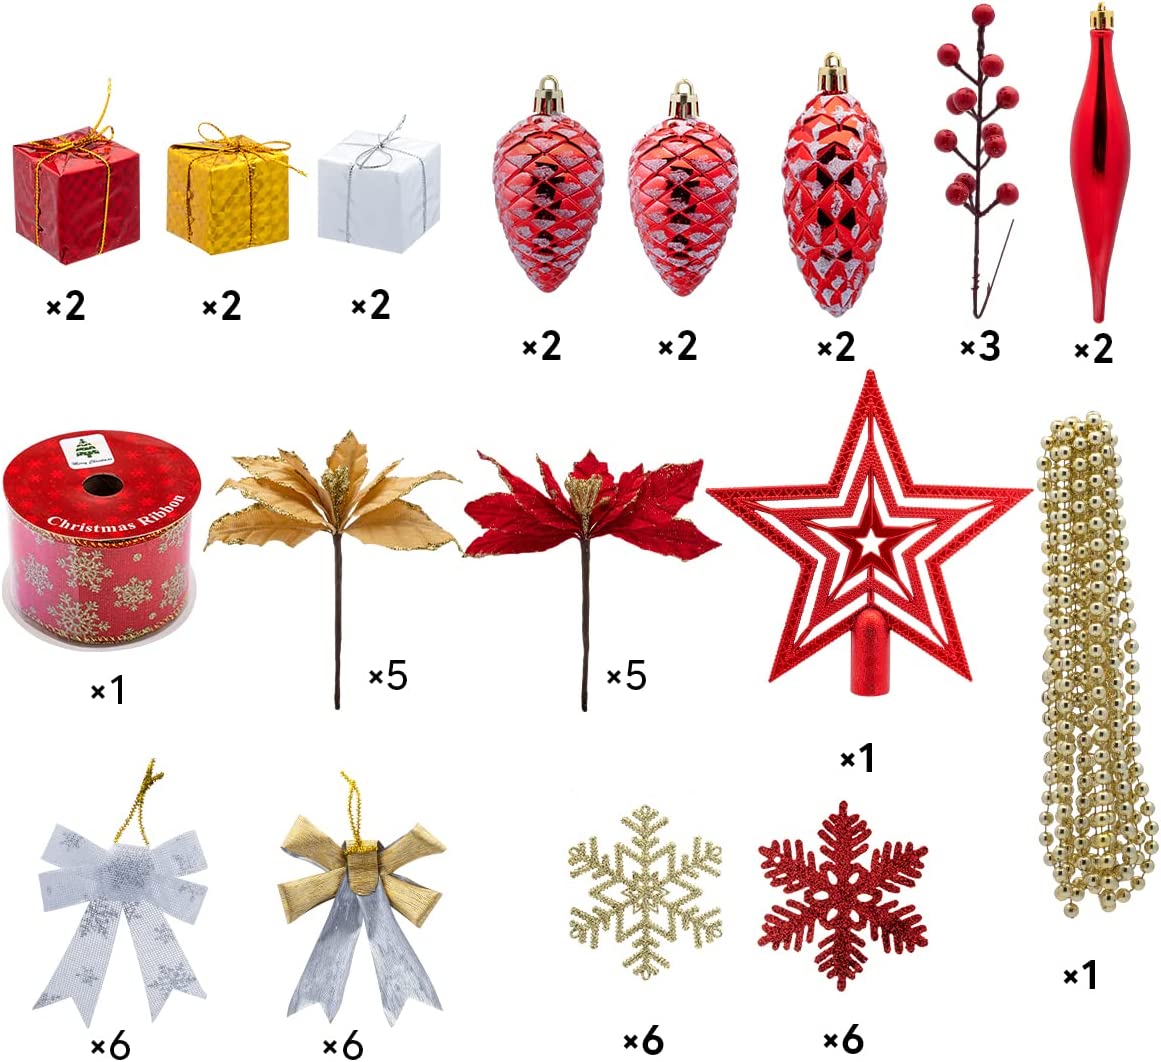 Assorted Ornaments Set with Bow and Ball, 130 Pcs